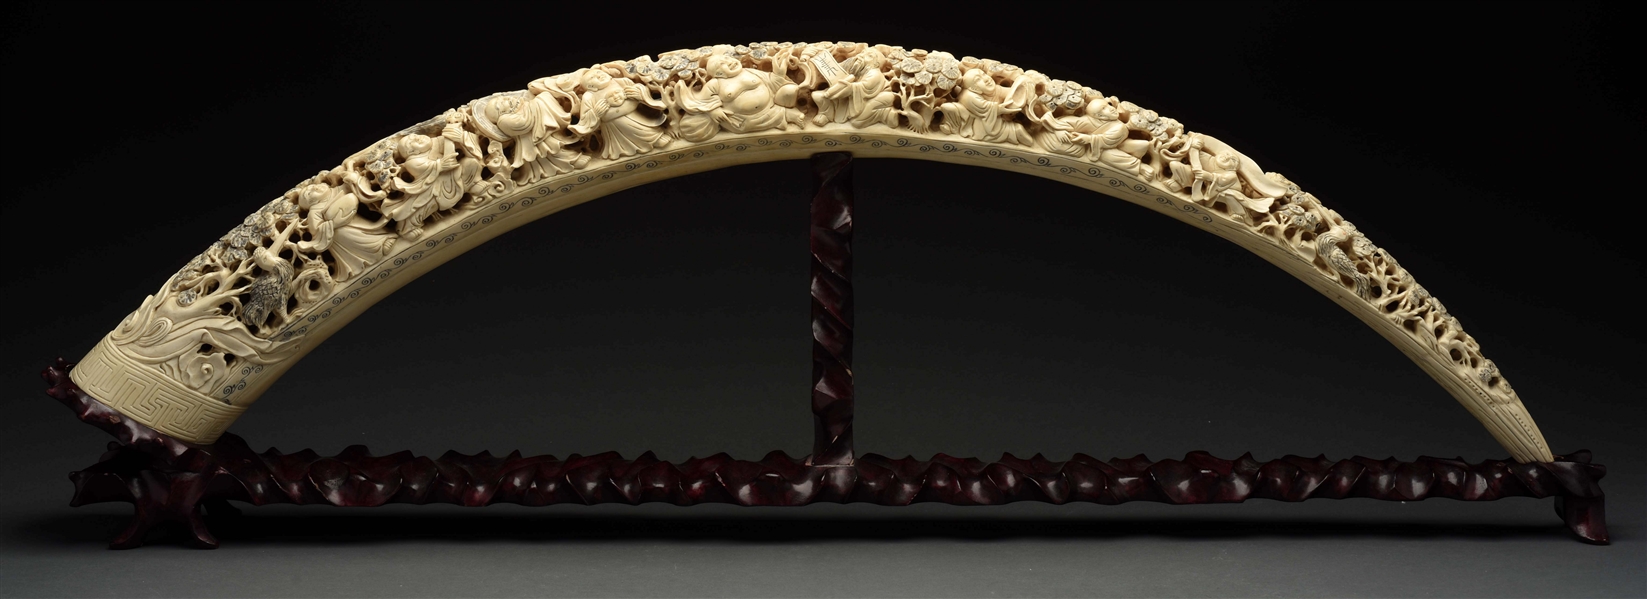 CARVED ELEPHANT IVORY TUSK WITH STAND. 